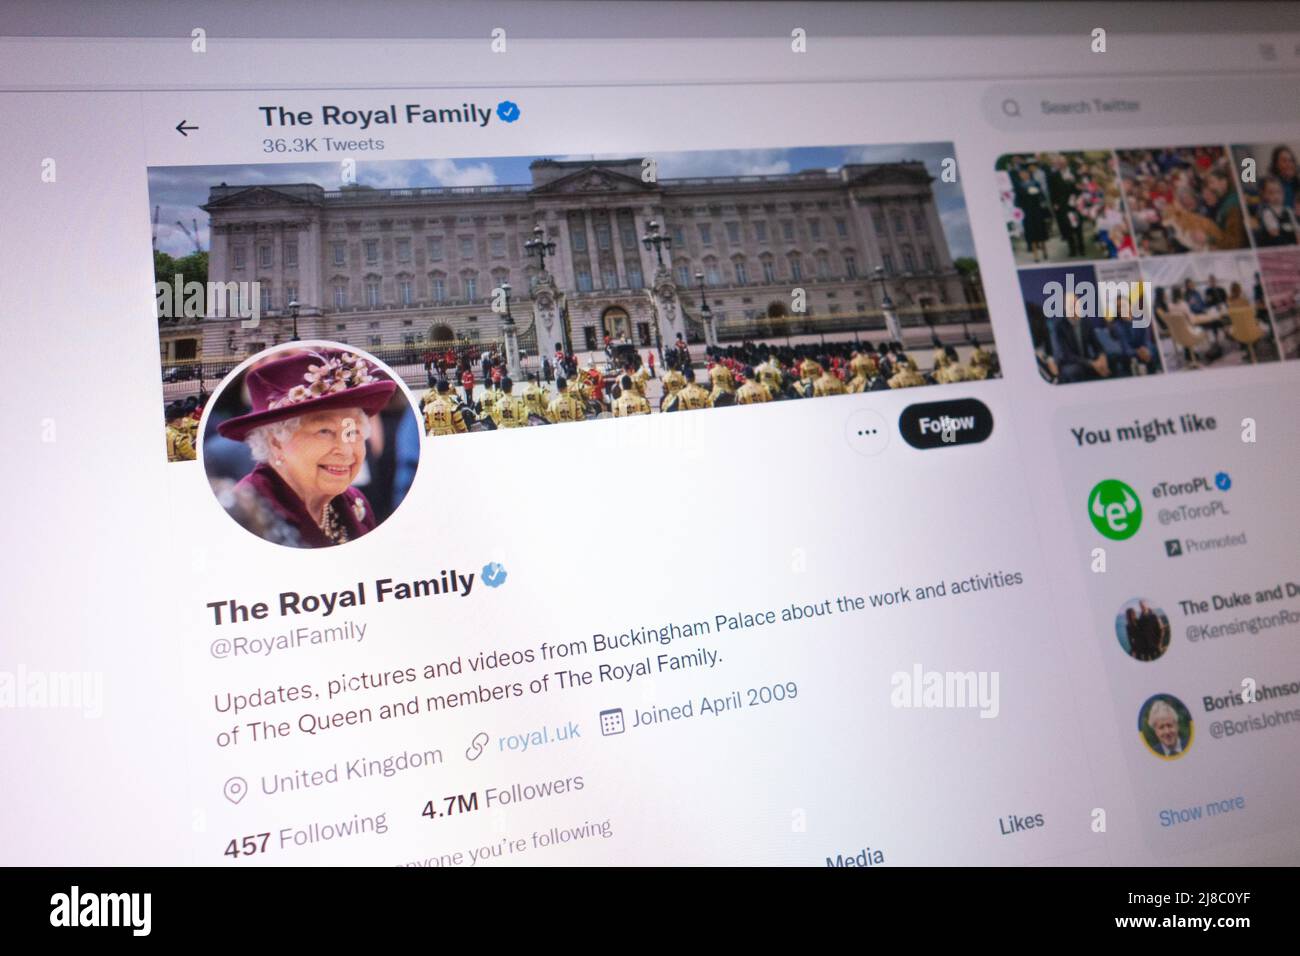 KONSKIE, POLAND - May 14, 2022: The Royal Family official Twitter account displayed on laptop screen Stock Photo